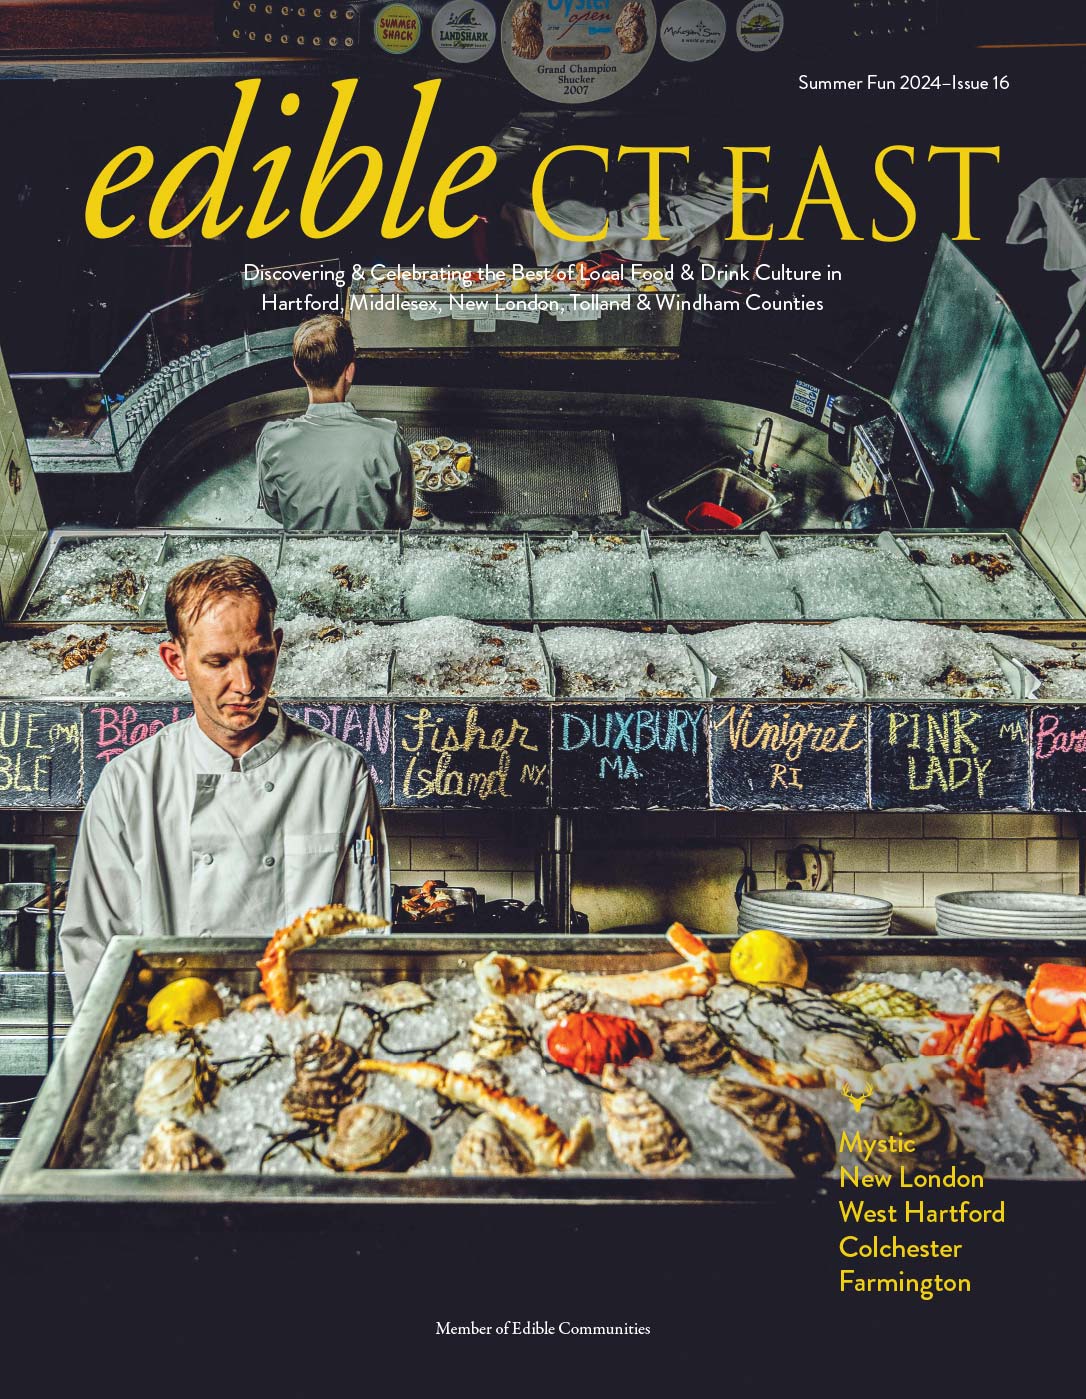 Edible CT East - Spring 2024 issue digital edition